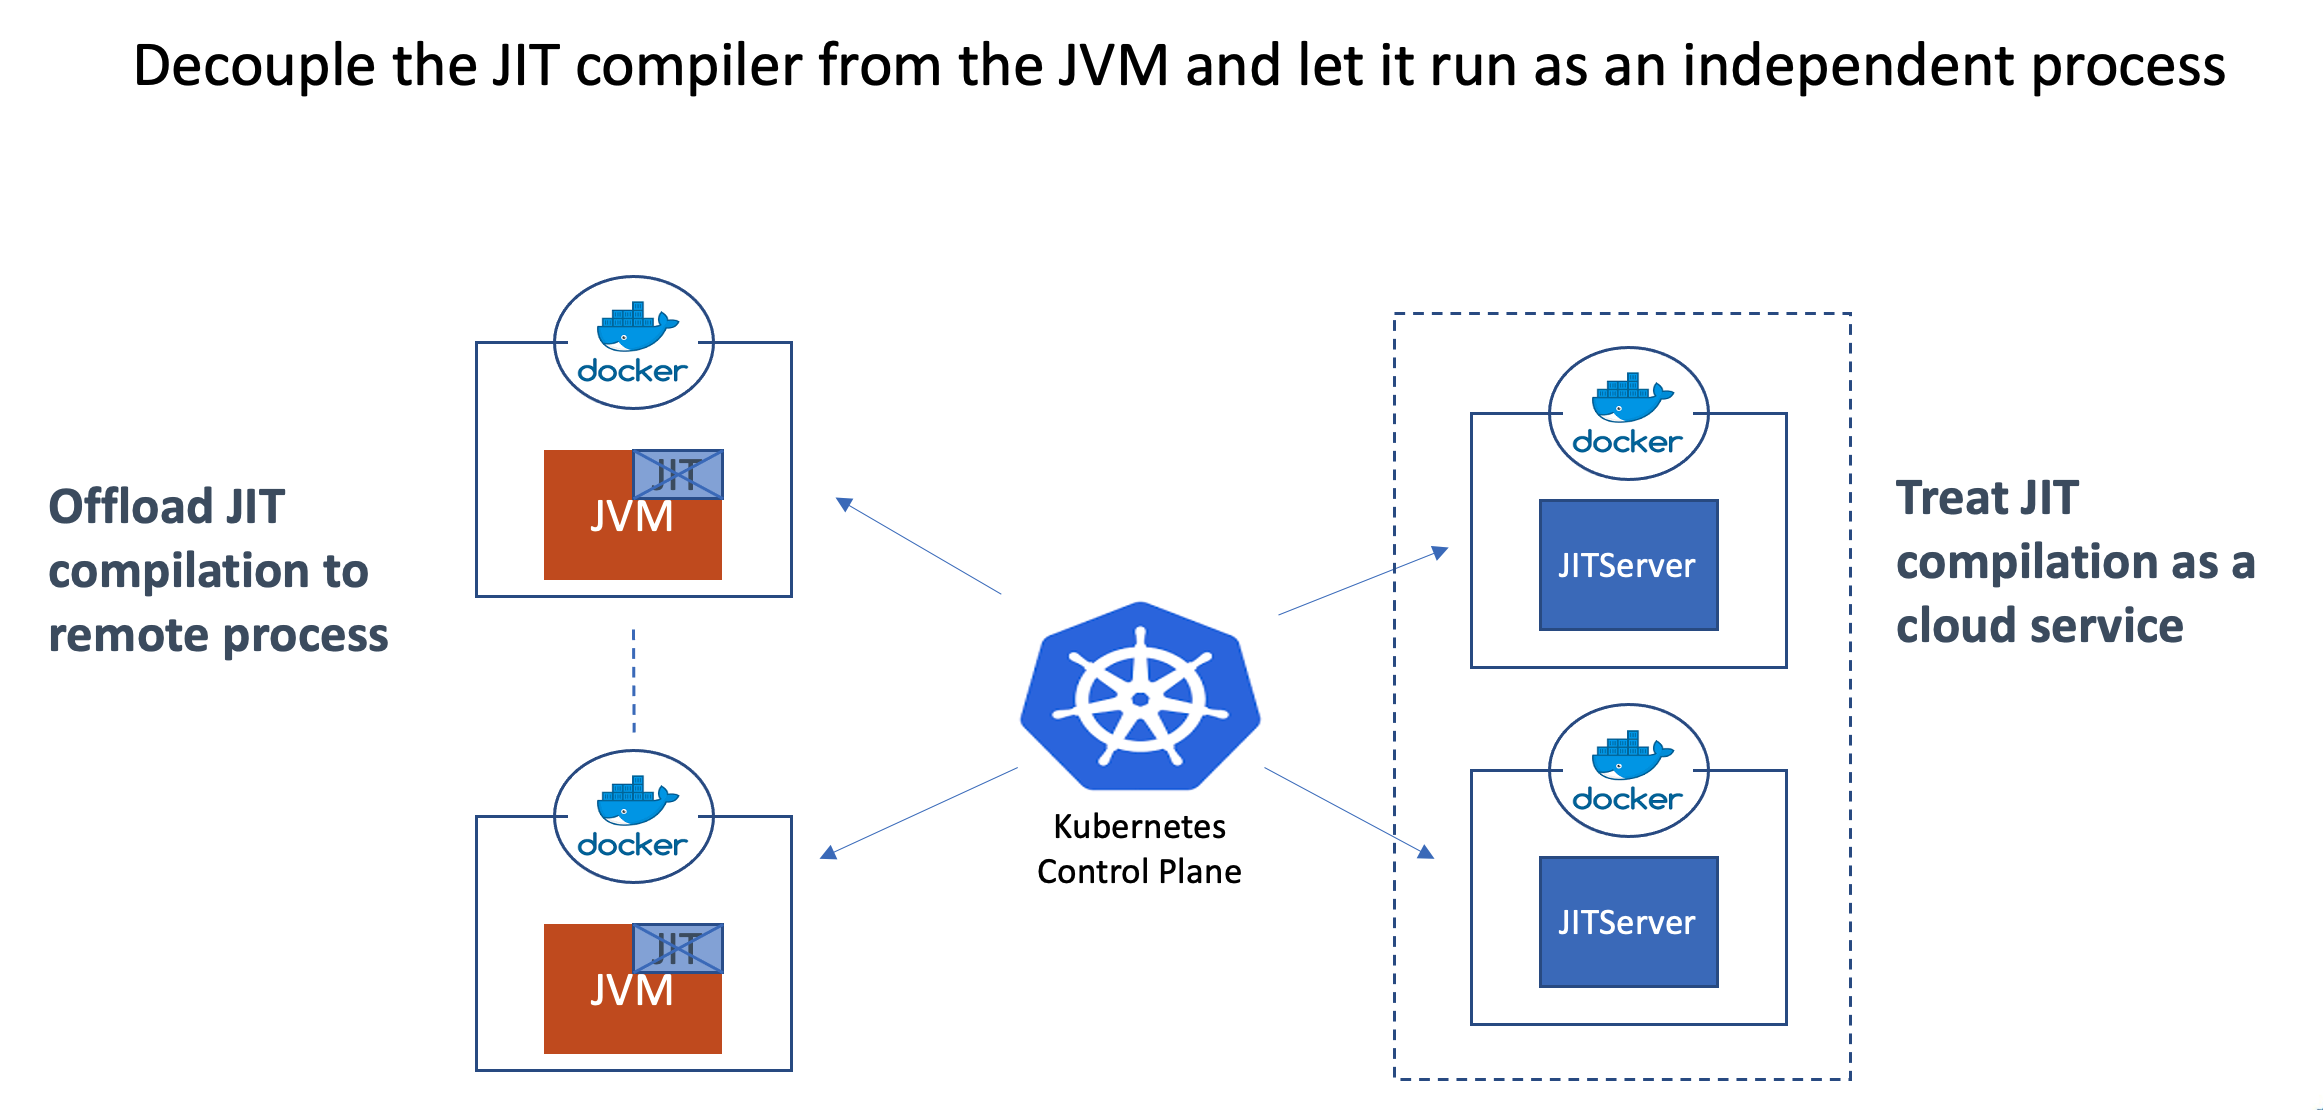 Diagram showing the decoupling of JIT compilation from the JVM to run as an independent process.